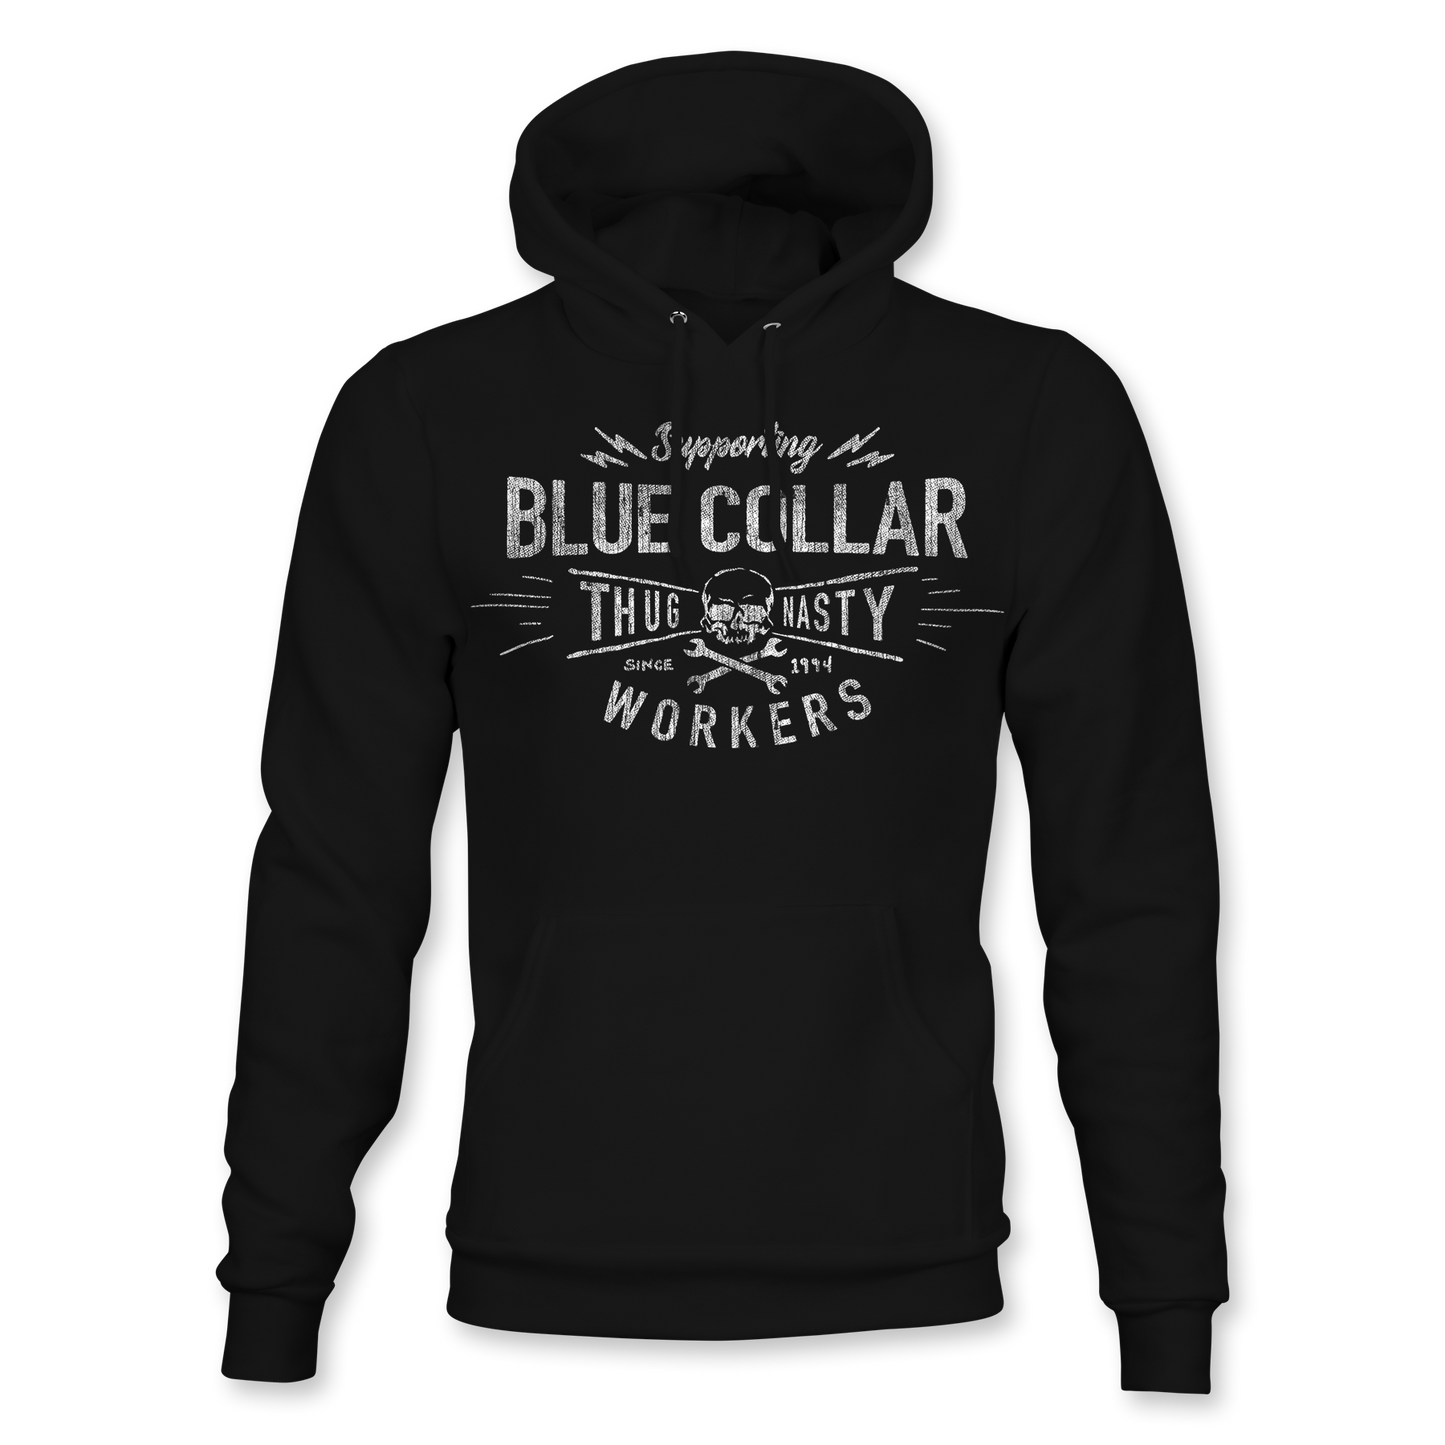 Support Blue Collar Workers Hoodie